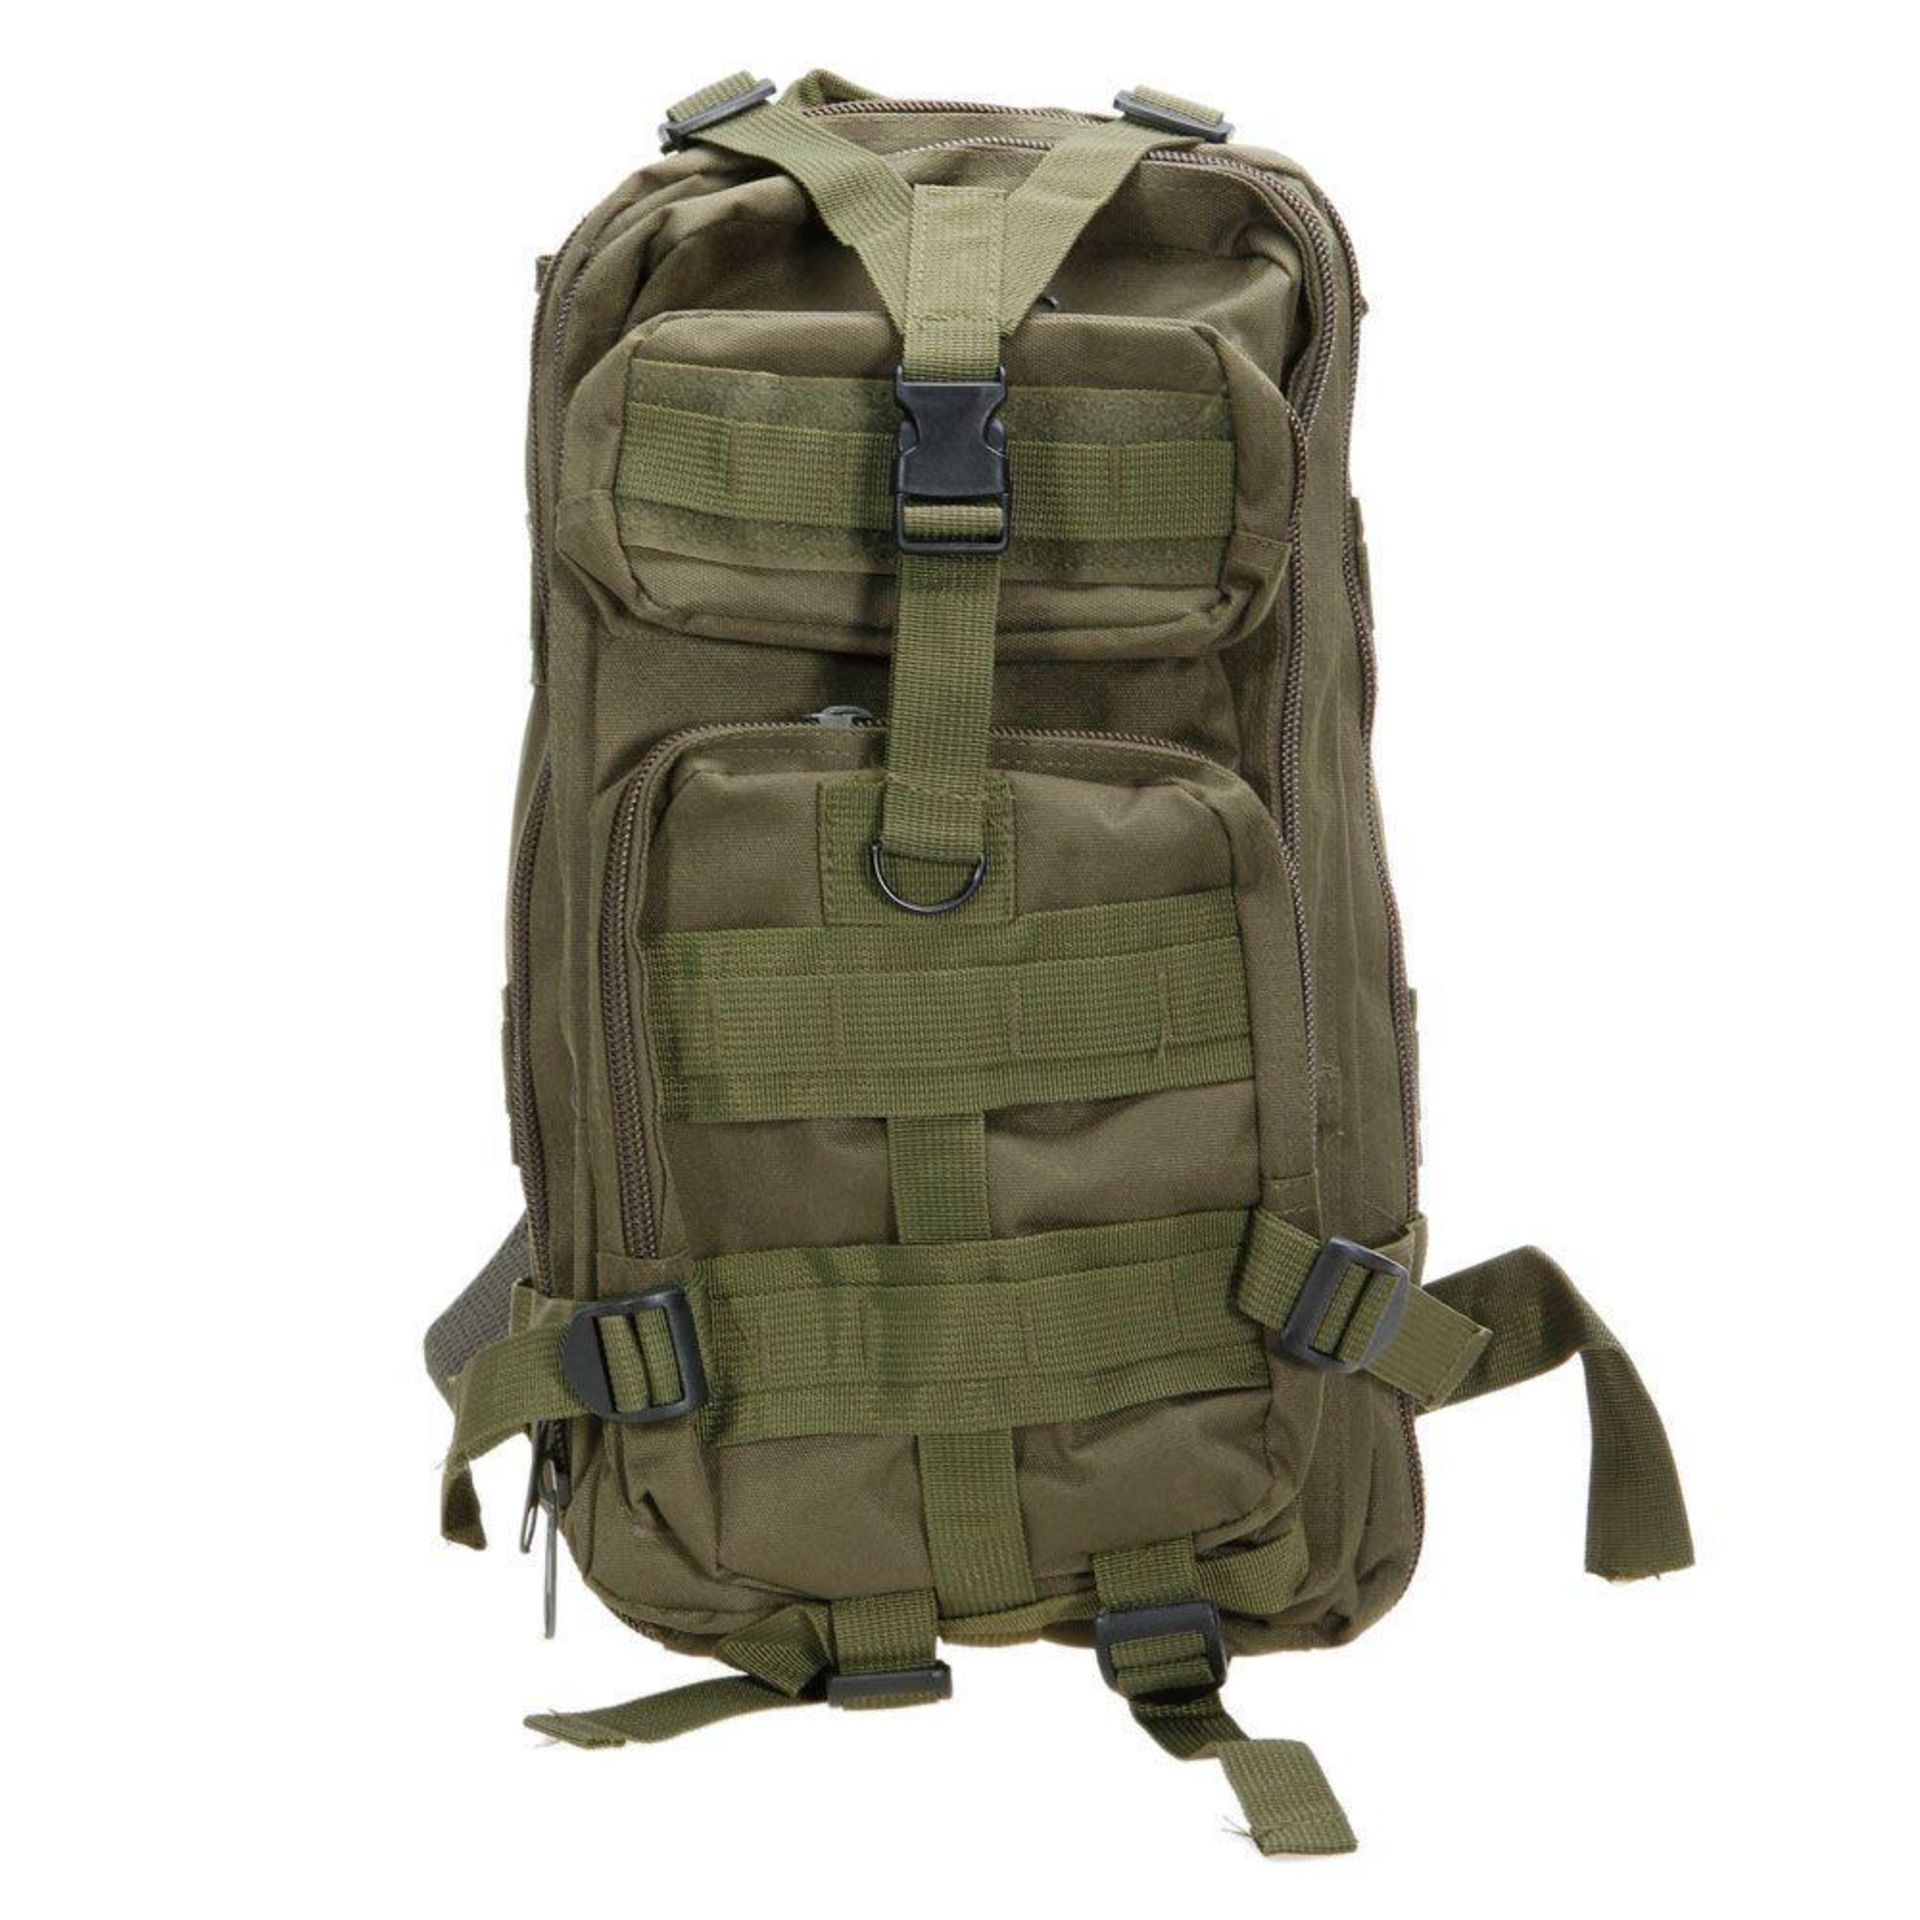 NEW Outdoor Neutral Adjustable Military Tactic Backpack, Color: Army Green